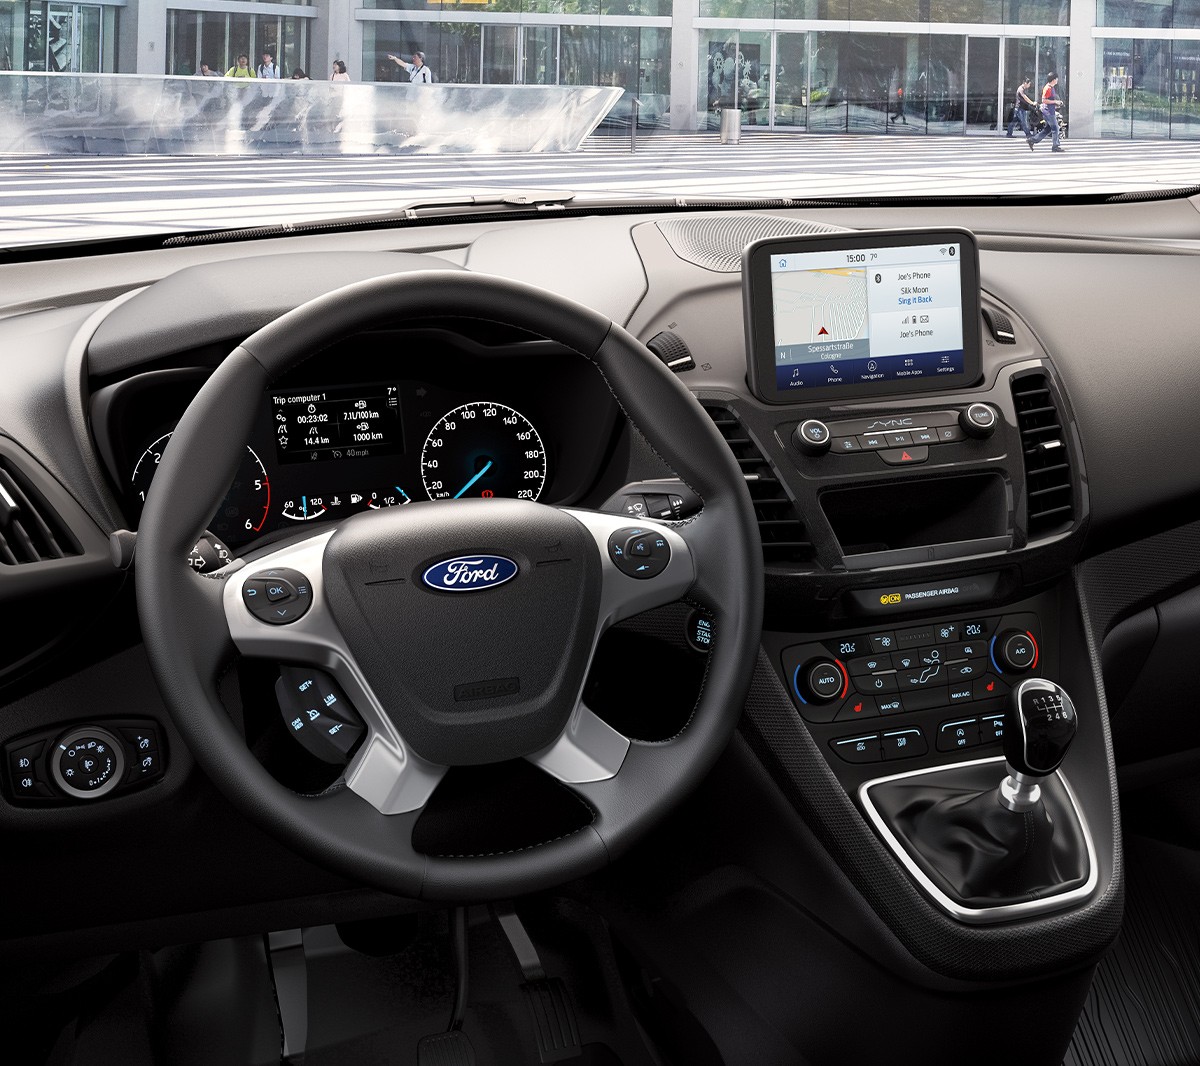 Ford Transit Connect interior cabin view